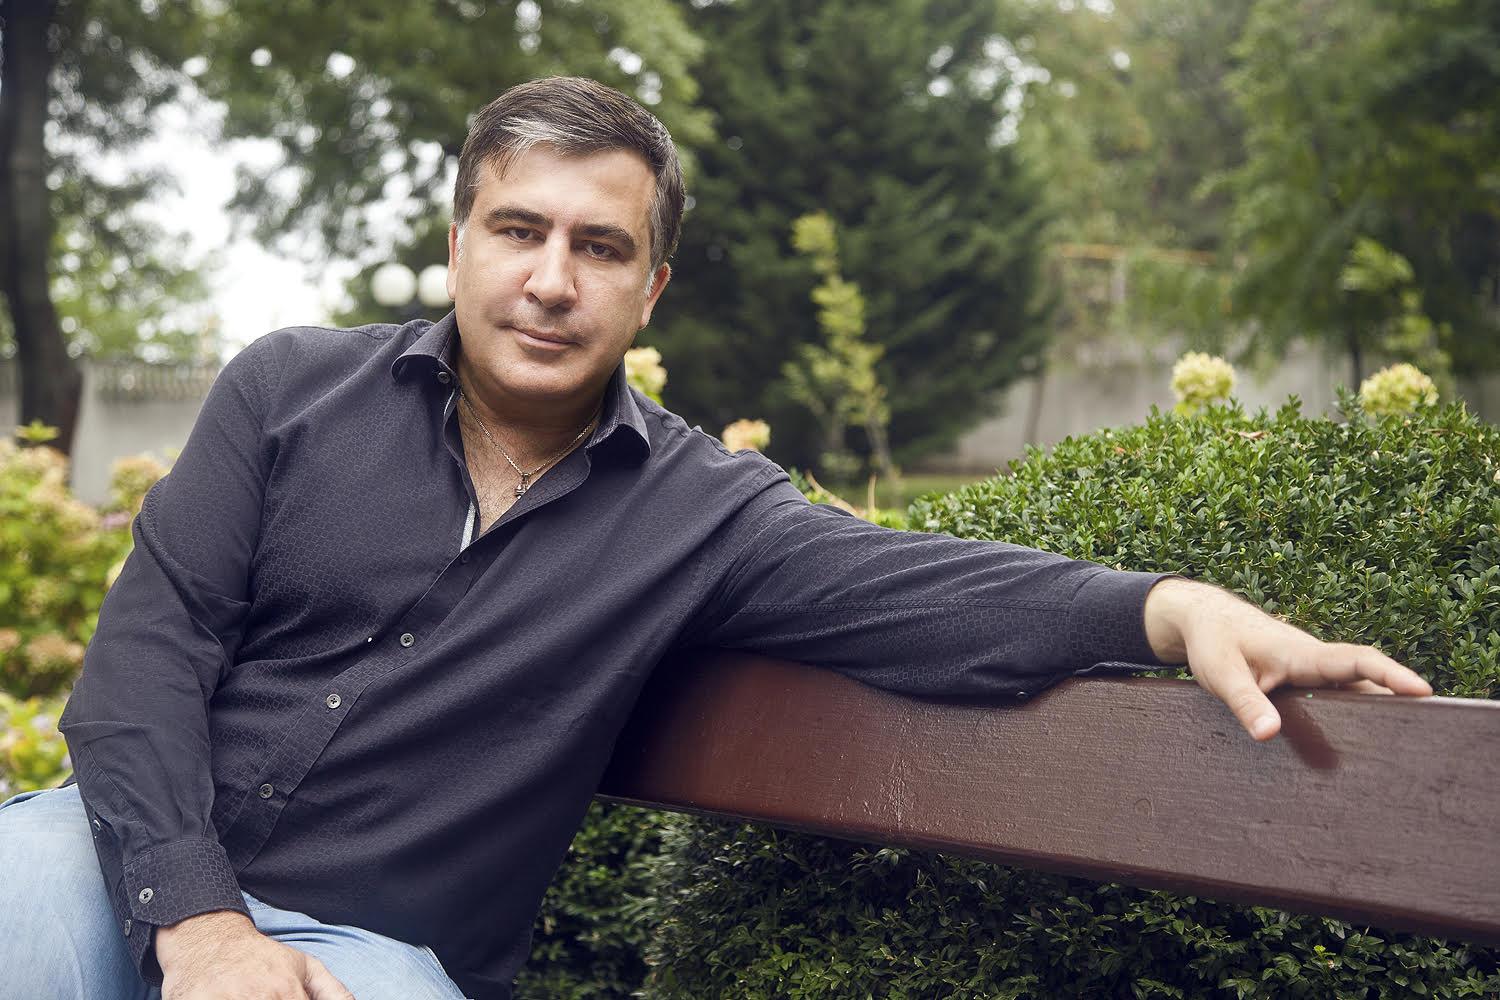 Saakashvili: after the victory, I want to return to Odessa